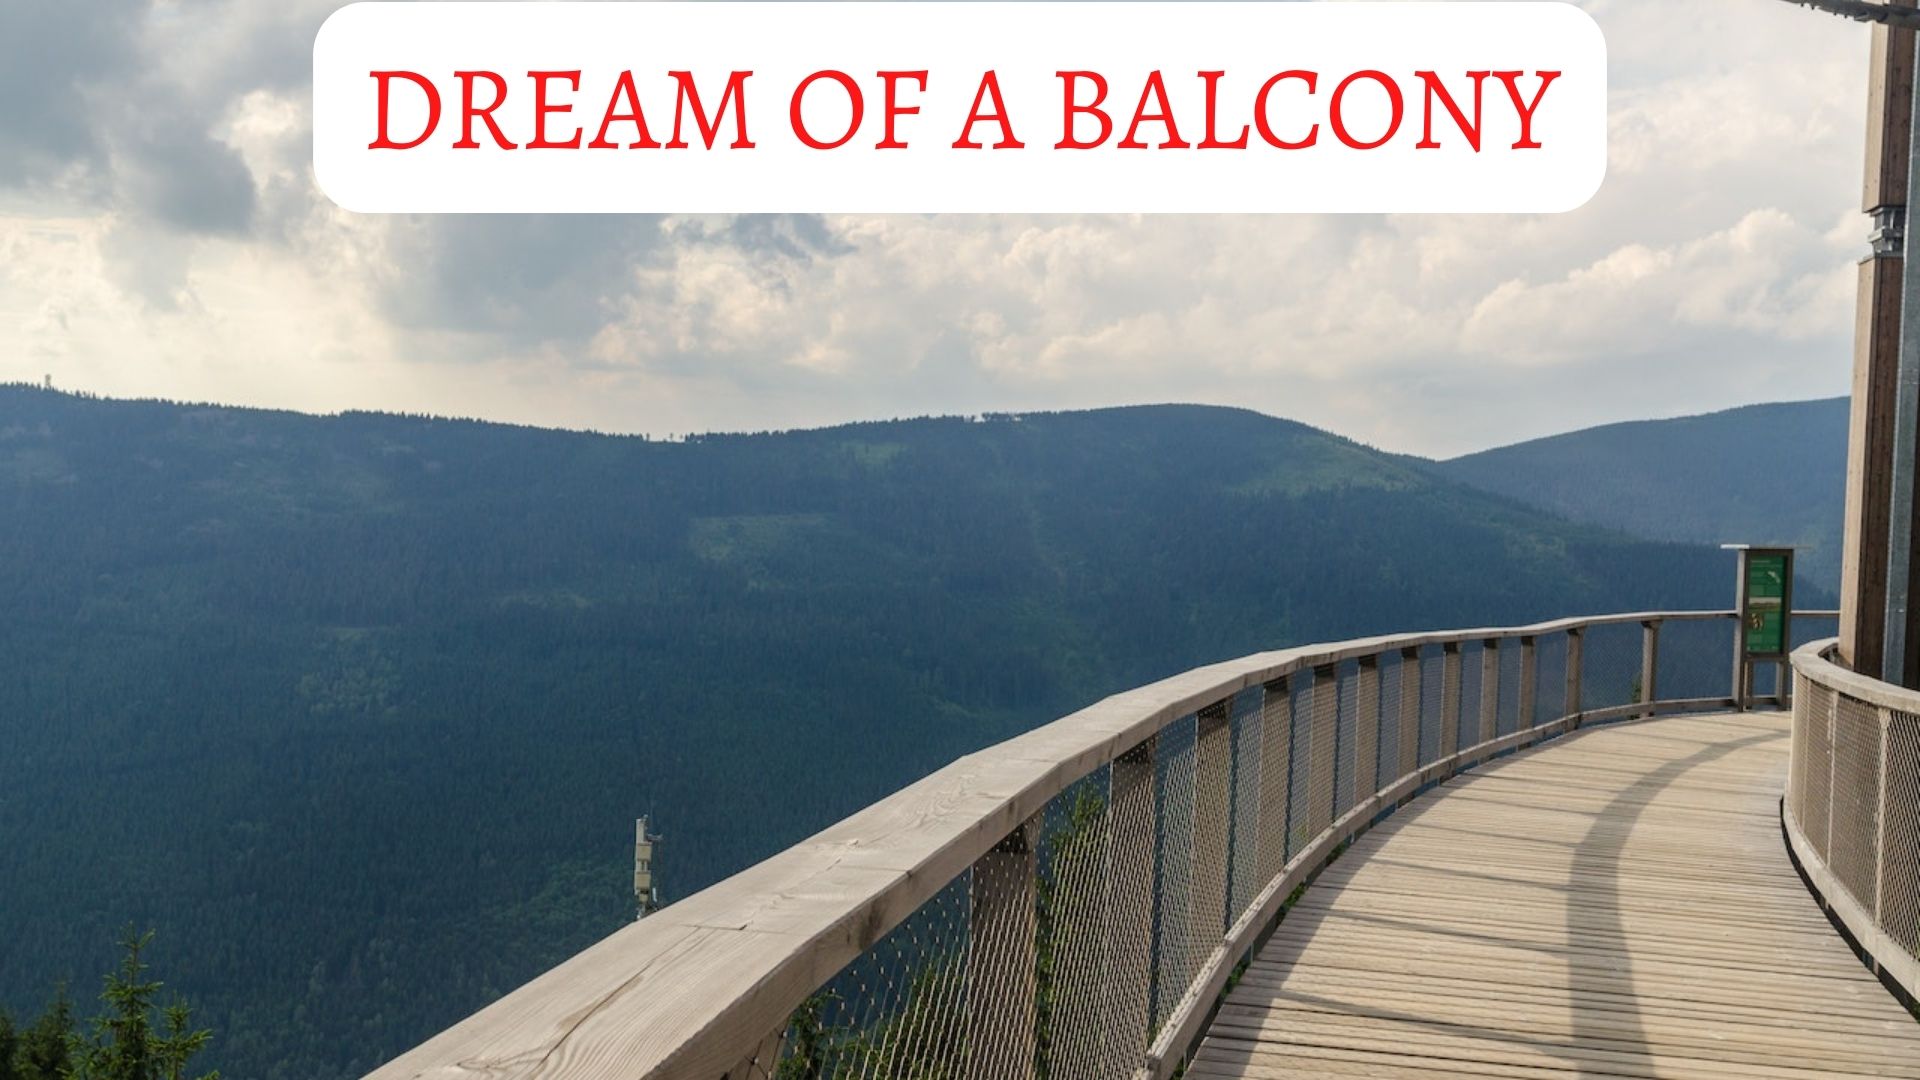 Dream Of A Balcony Meaning - The Need To Rest Mentally And Physically